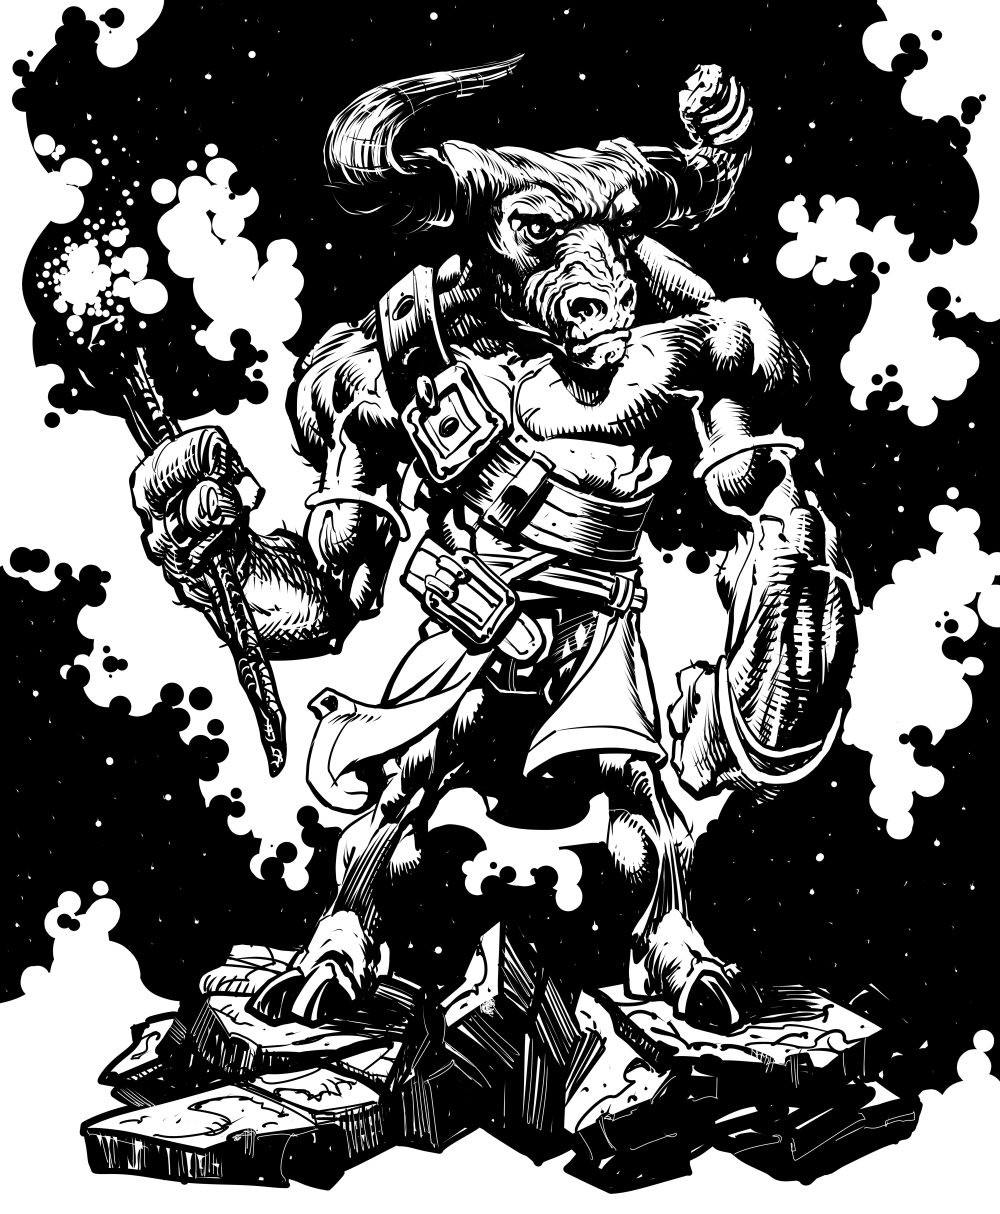 Black and white illustration, fanciful Bullman, standing in Space.